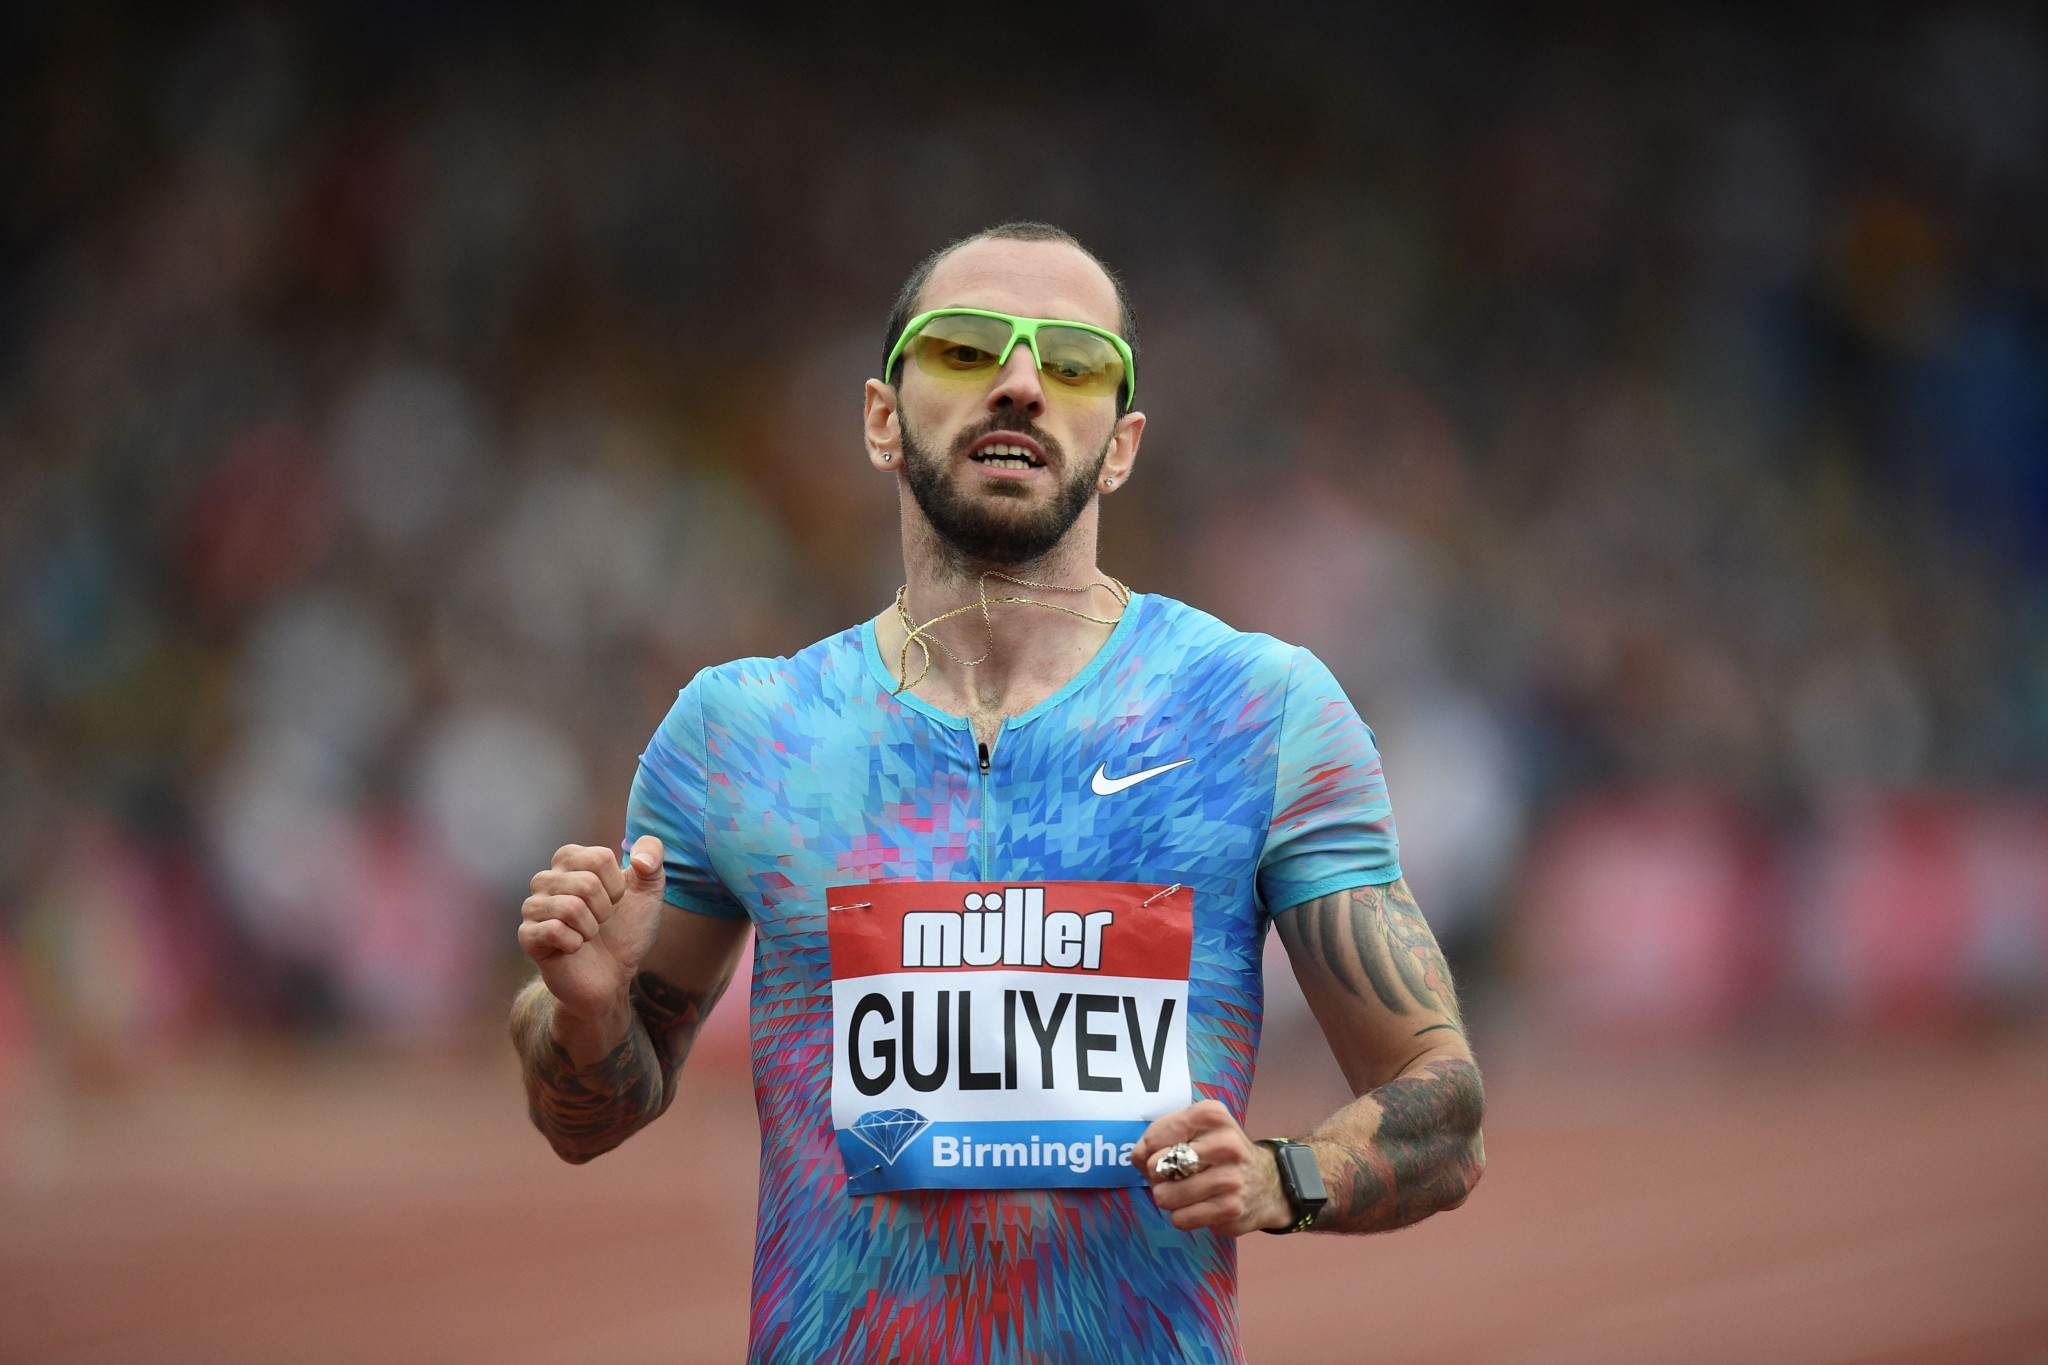 Guliyev wins in record breaking time as athletics kicks into gear at Mediterranean Games